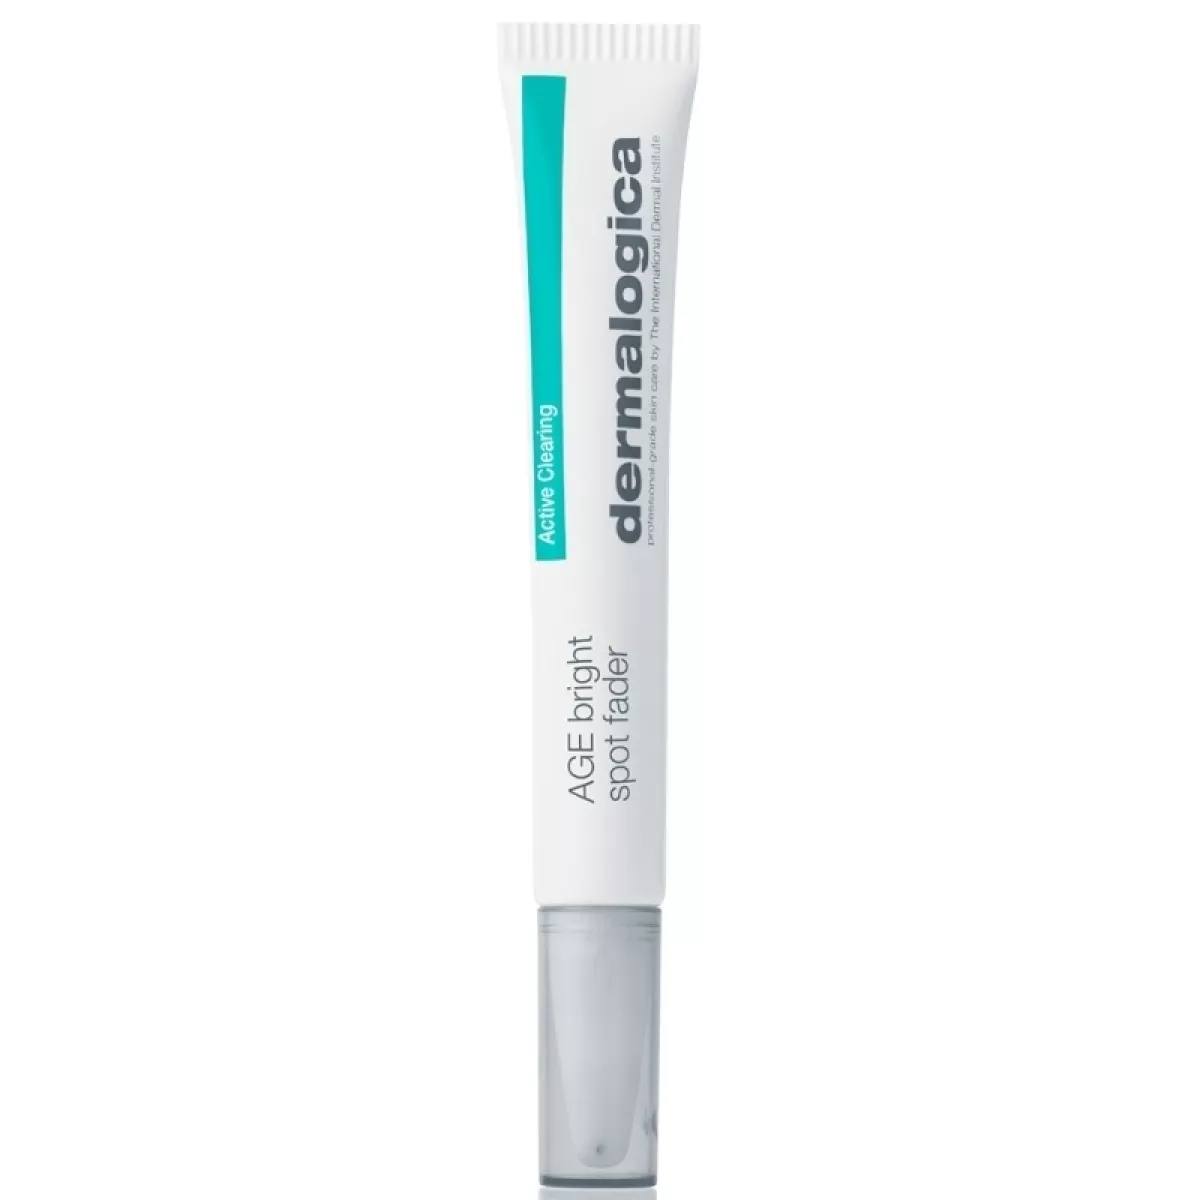 #3 - Dermalogica Active Clearing AGE Bright Spot Fader 15 ml